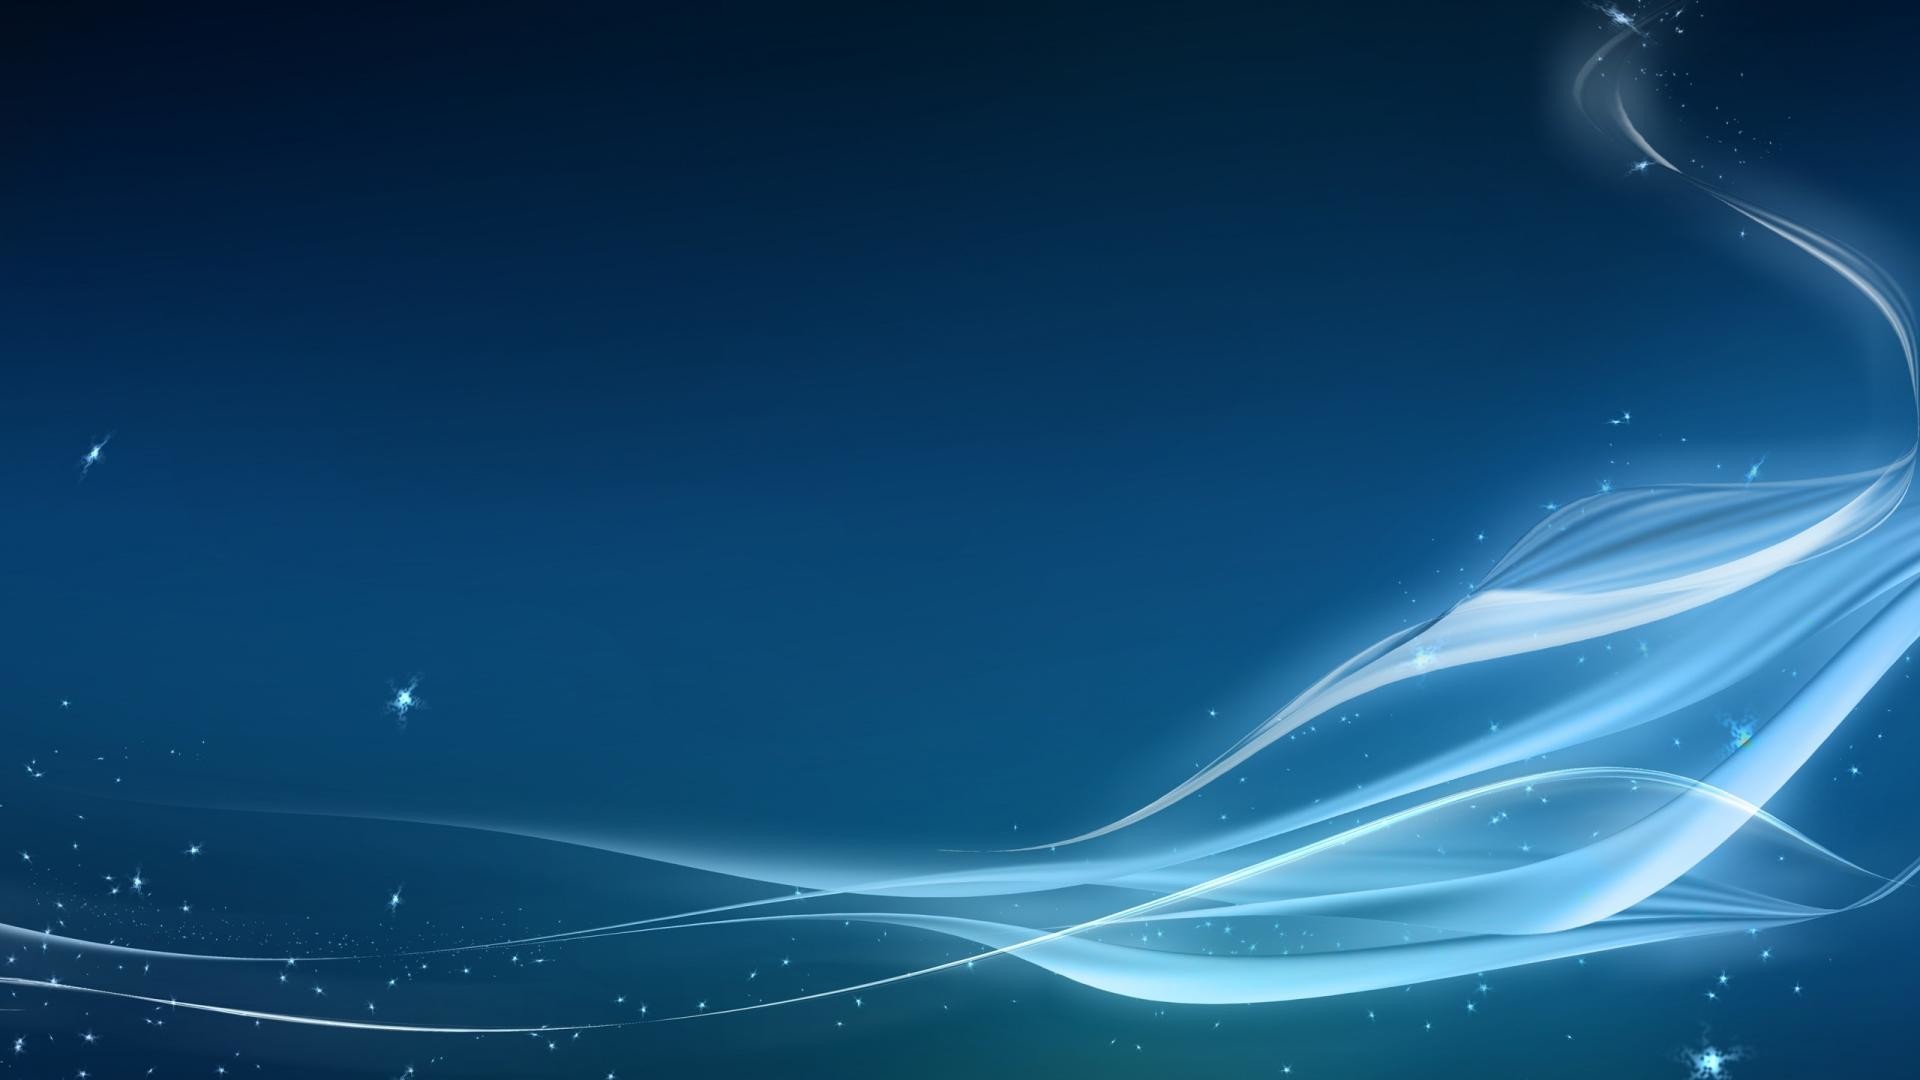 1920x1080 Dazzle Blue Backgrounds For Windows Vista Widescreen and HD